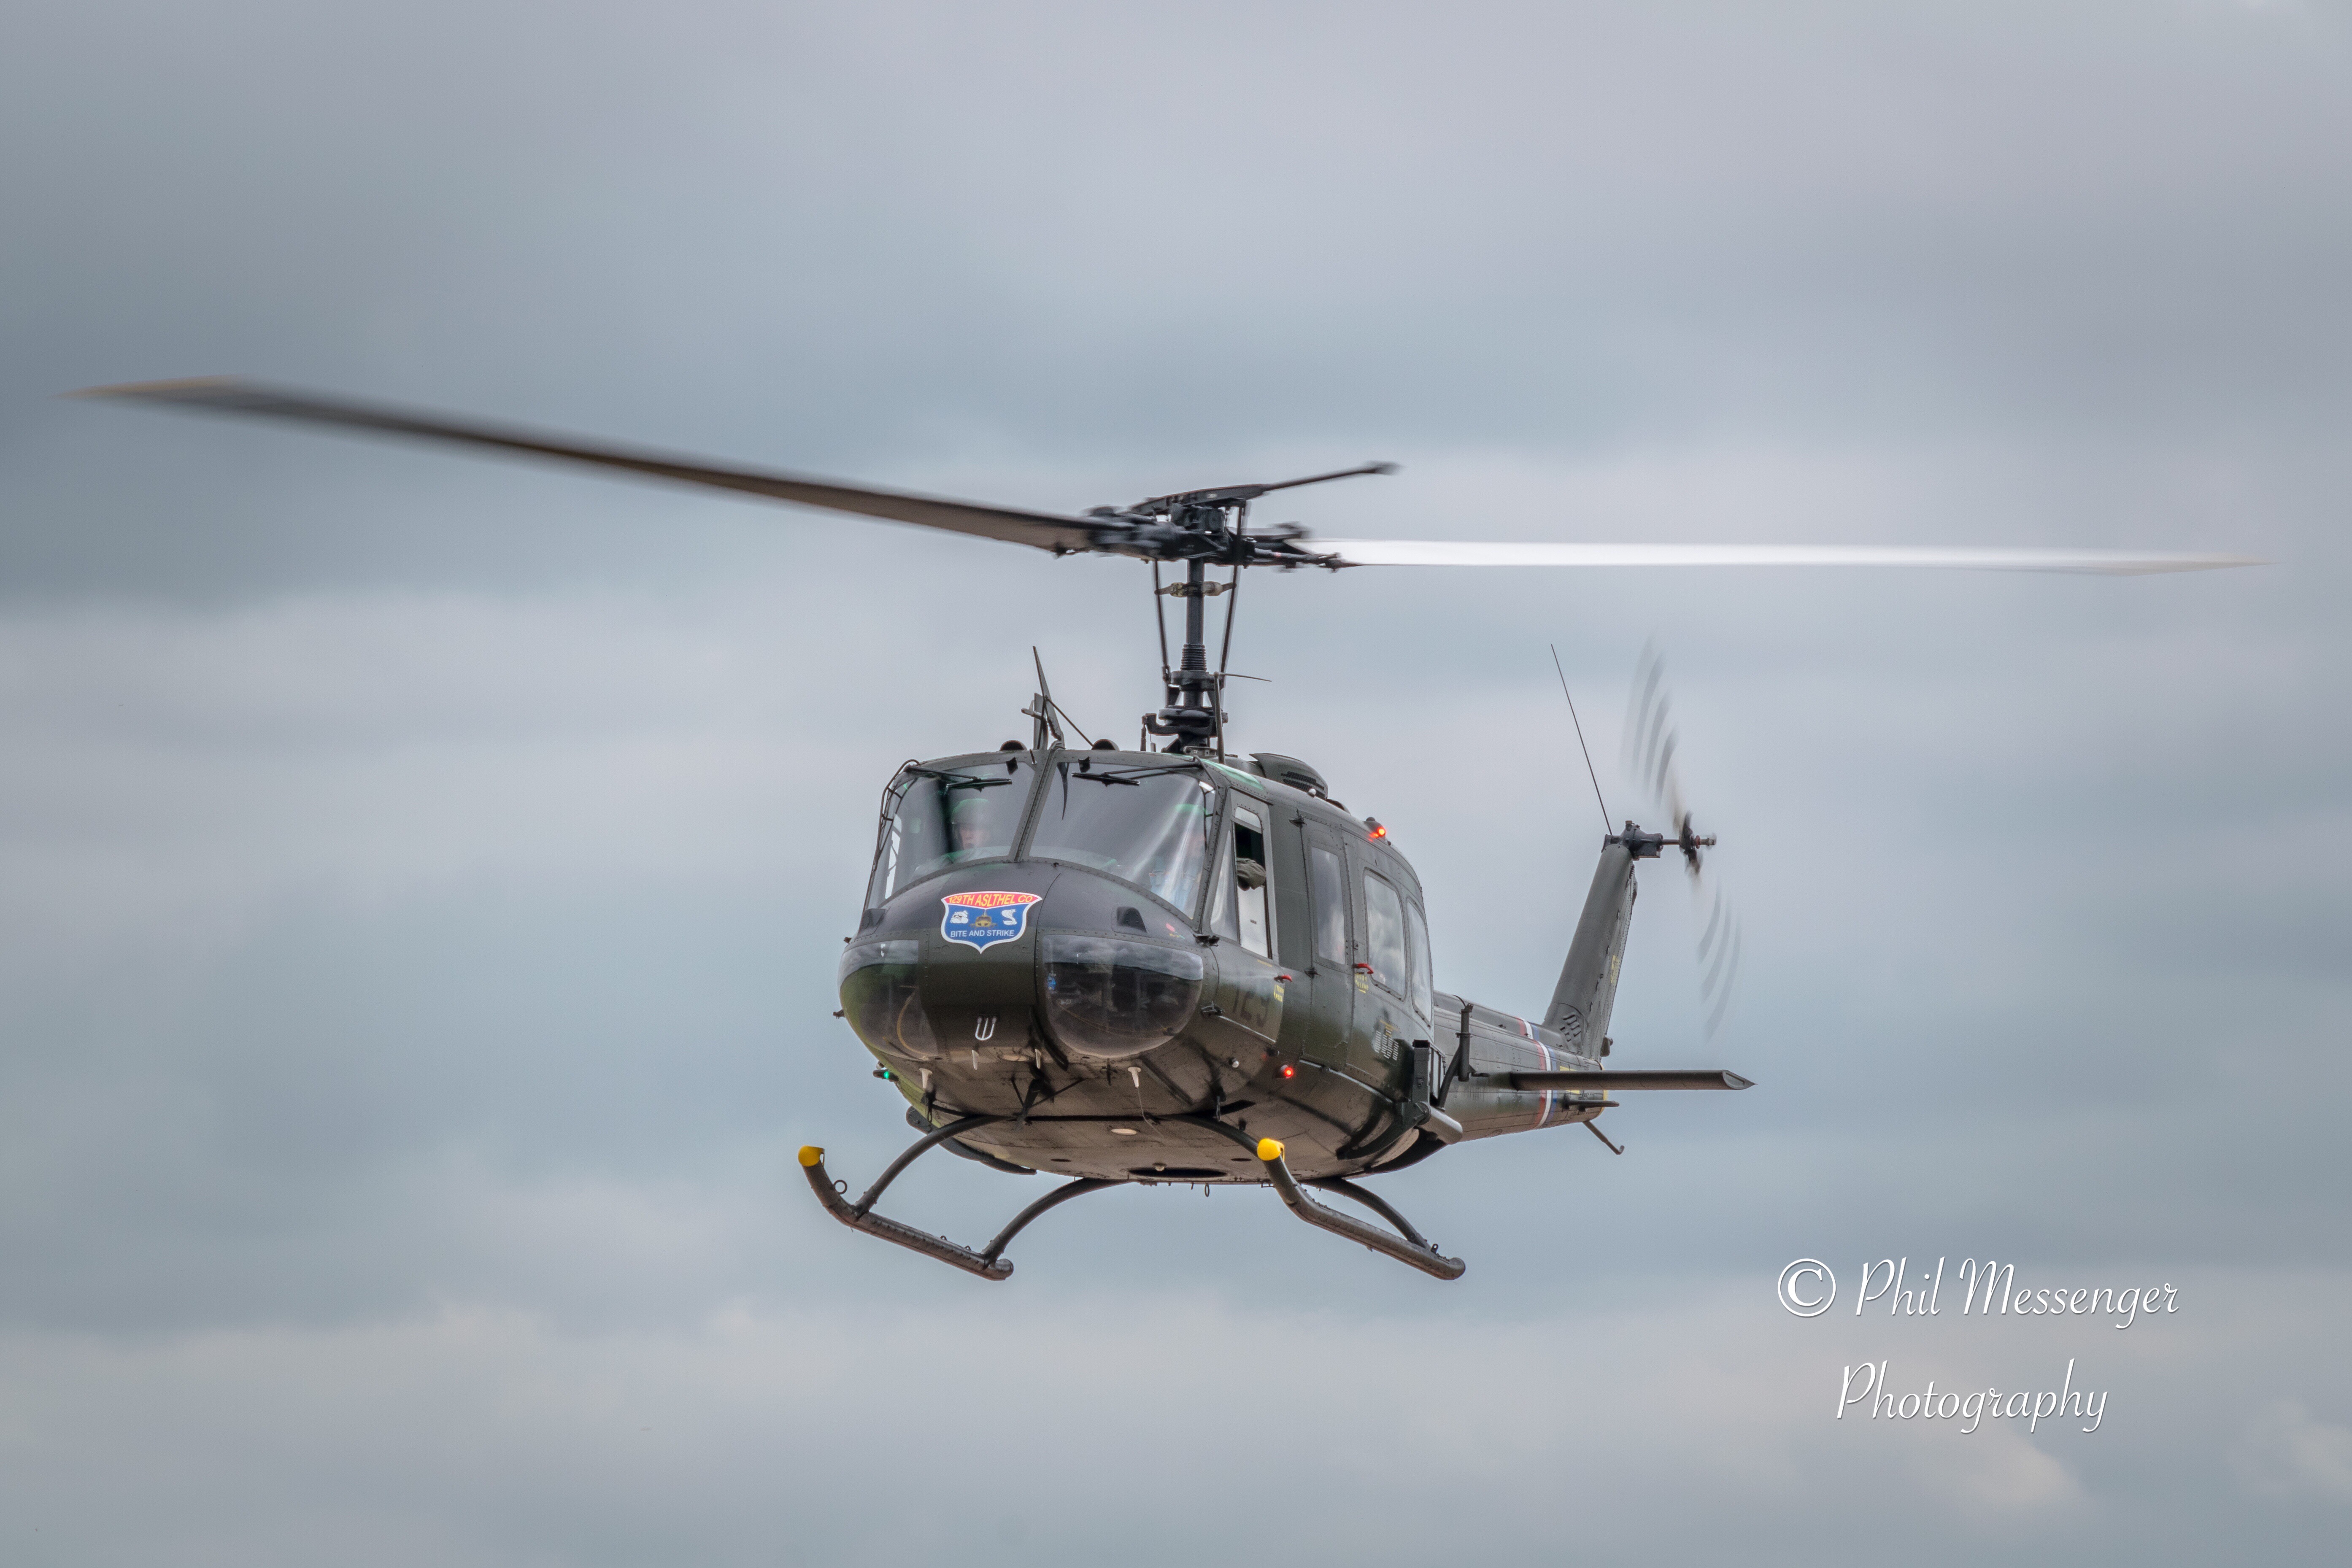 Bell UH-1H (Huey) Helicopter departing the Royal International Air Tattoo 2019.